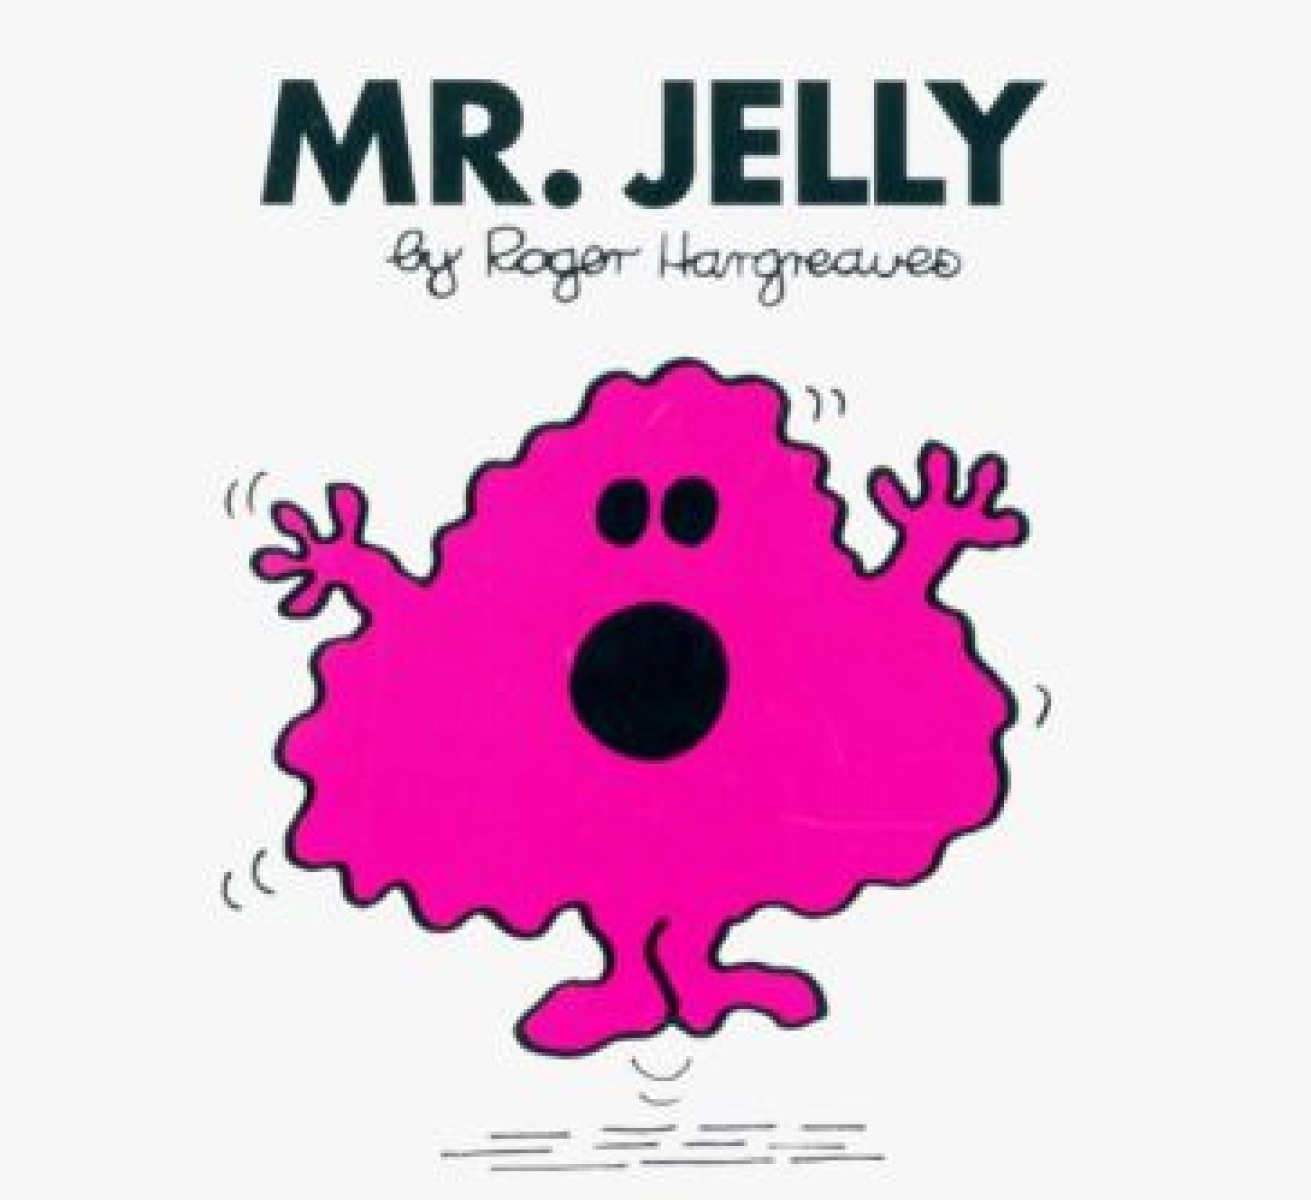 Hargreaves Roger Mr. Jelly 